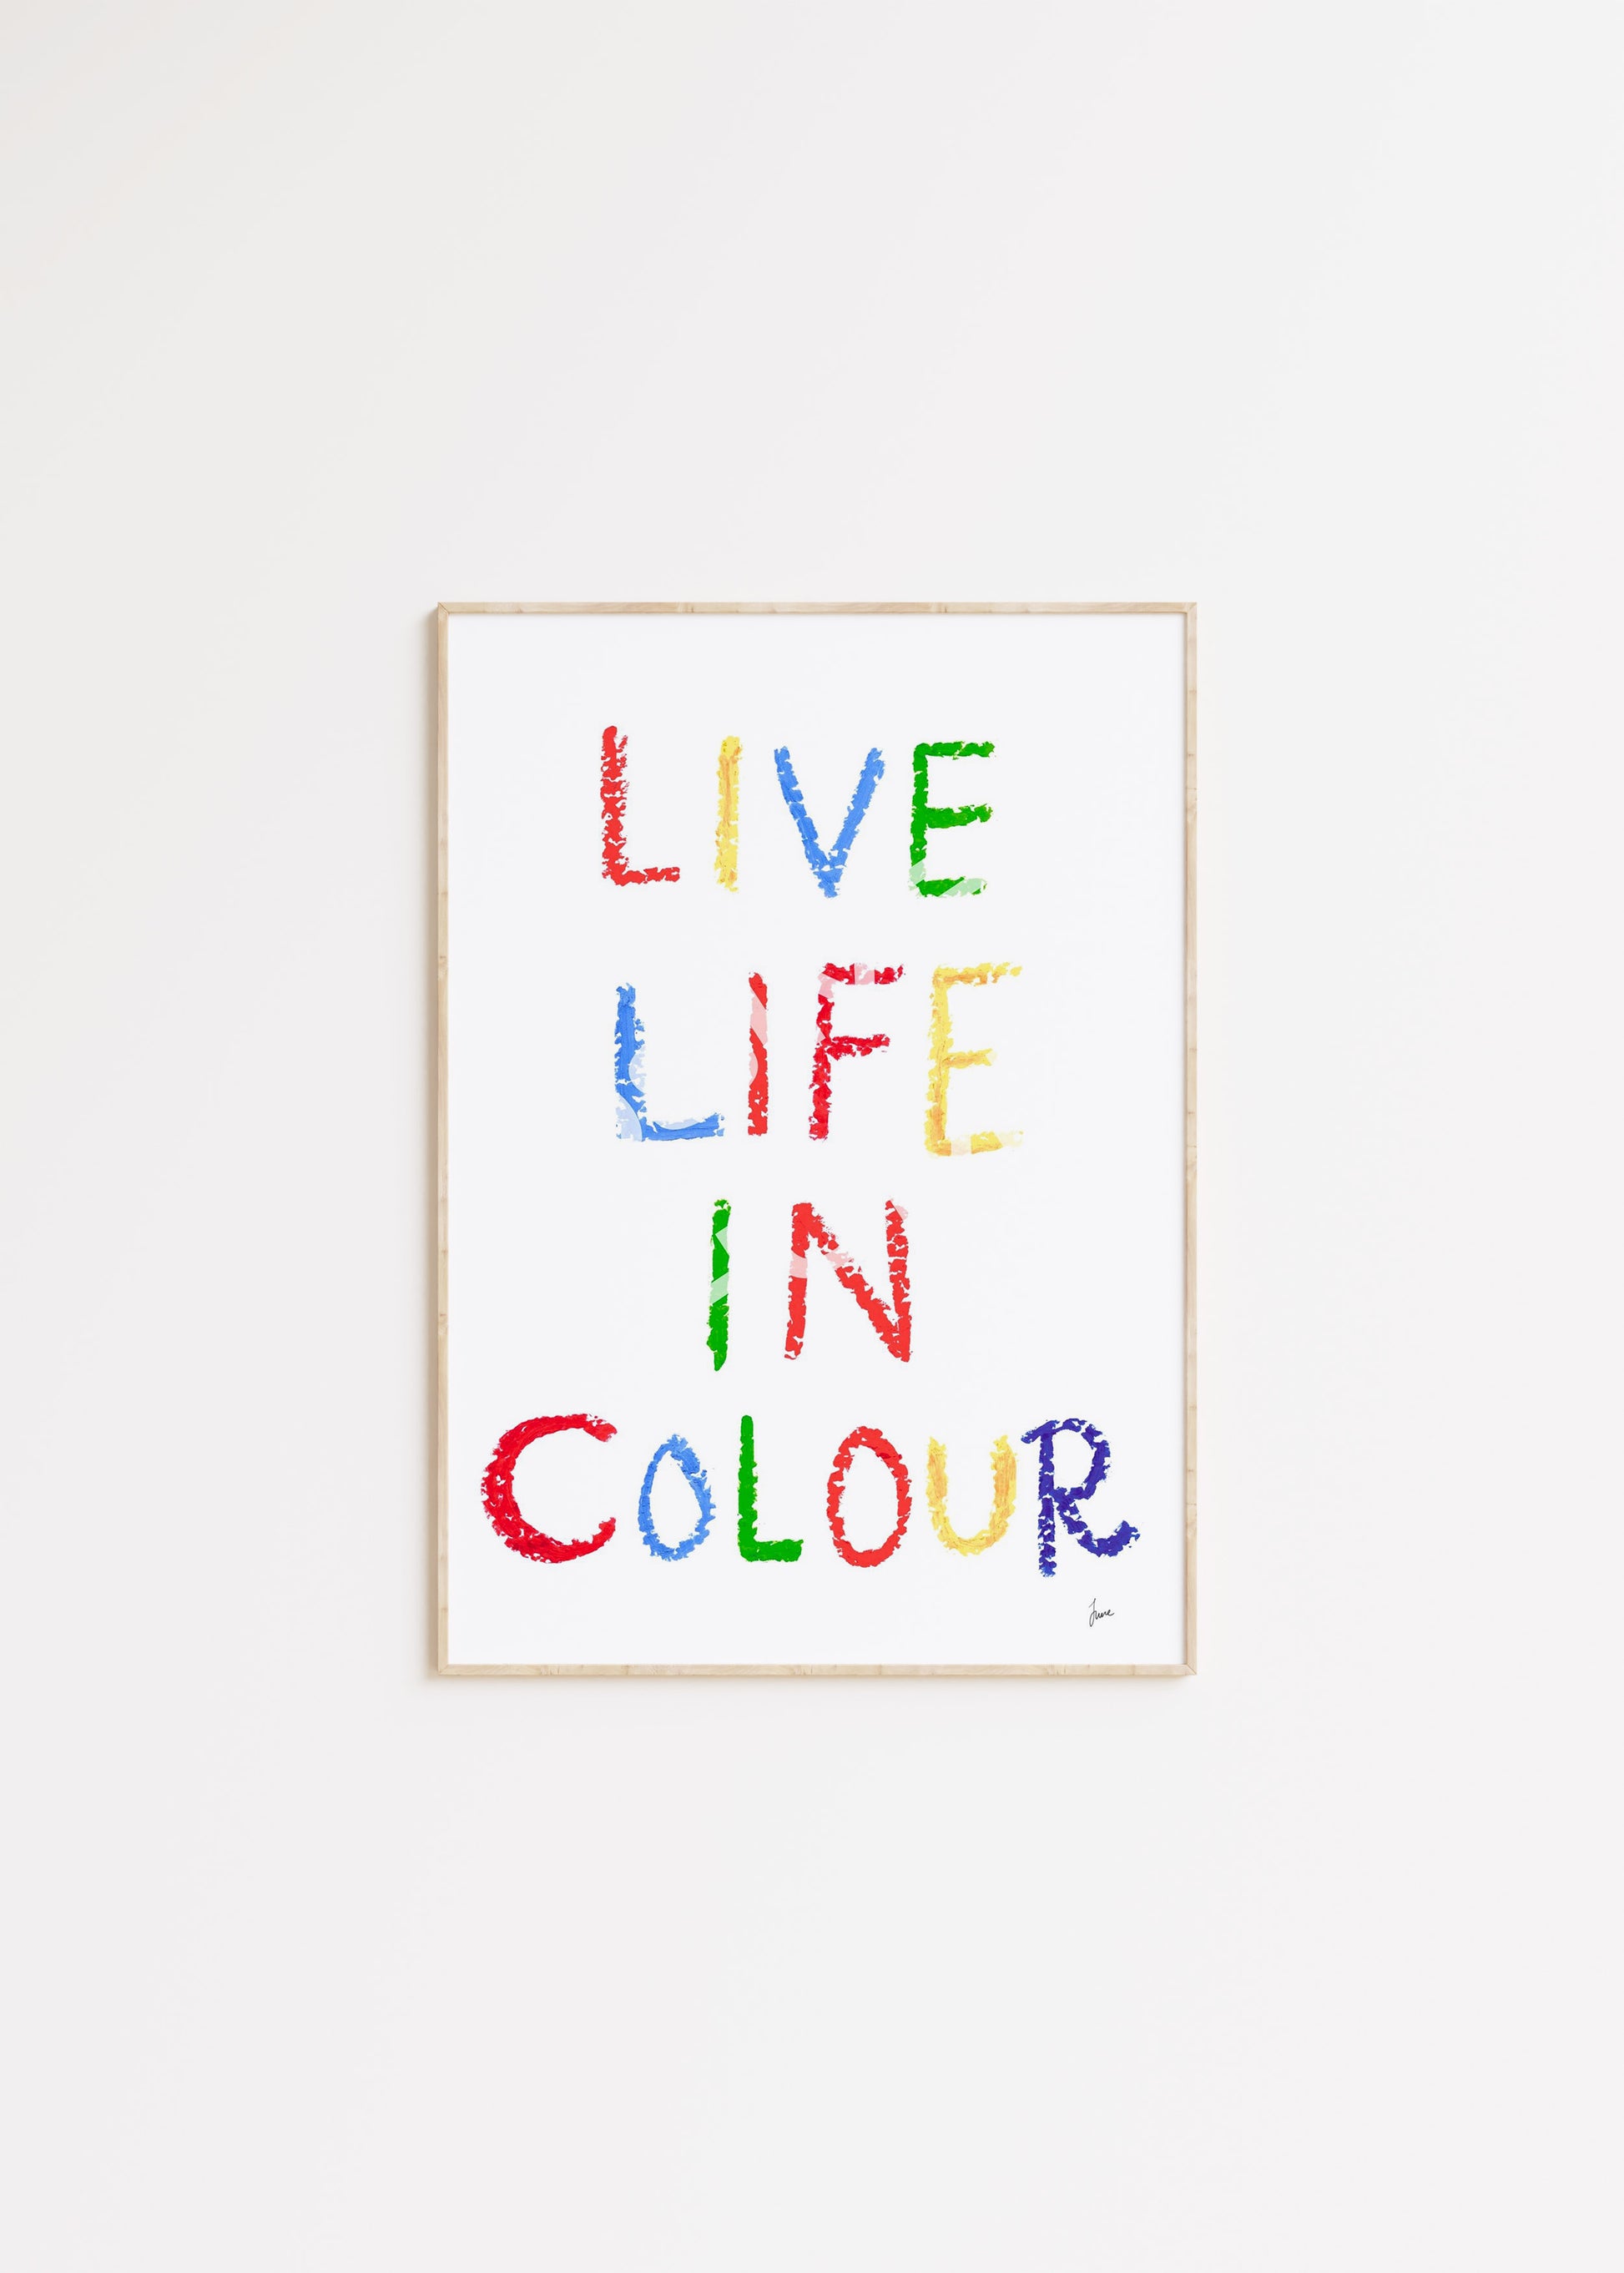 Live Life In Colour - Empowering statement wall art print celebration of inclusivity, love iand joys of life - Illustrated by Osime Home